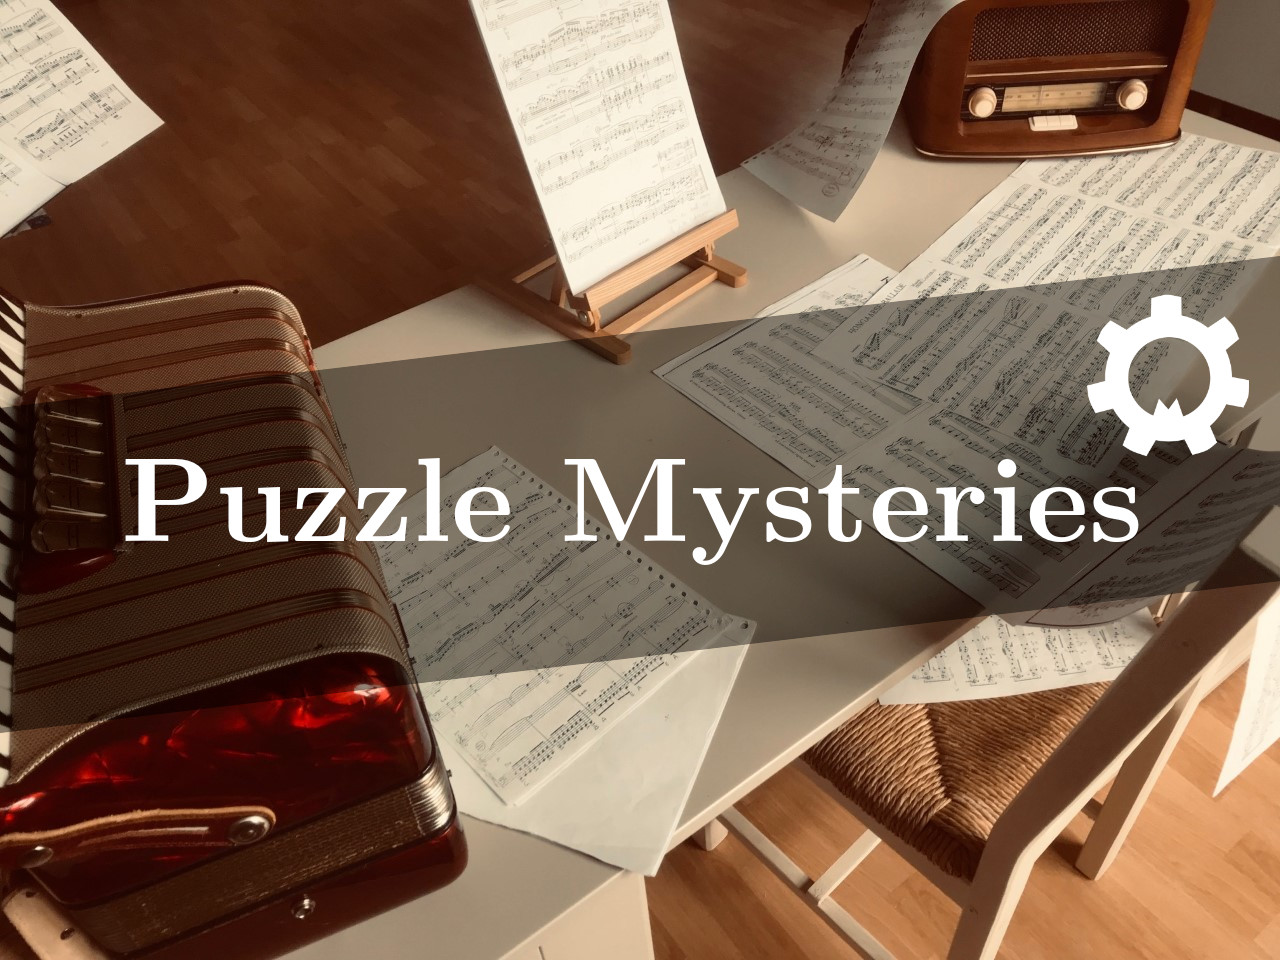 logo of Puzzle Mysteries